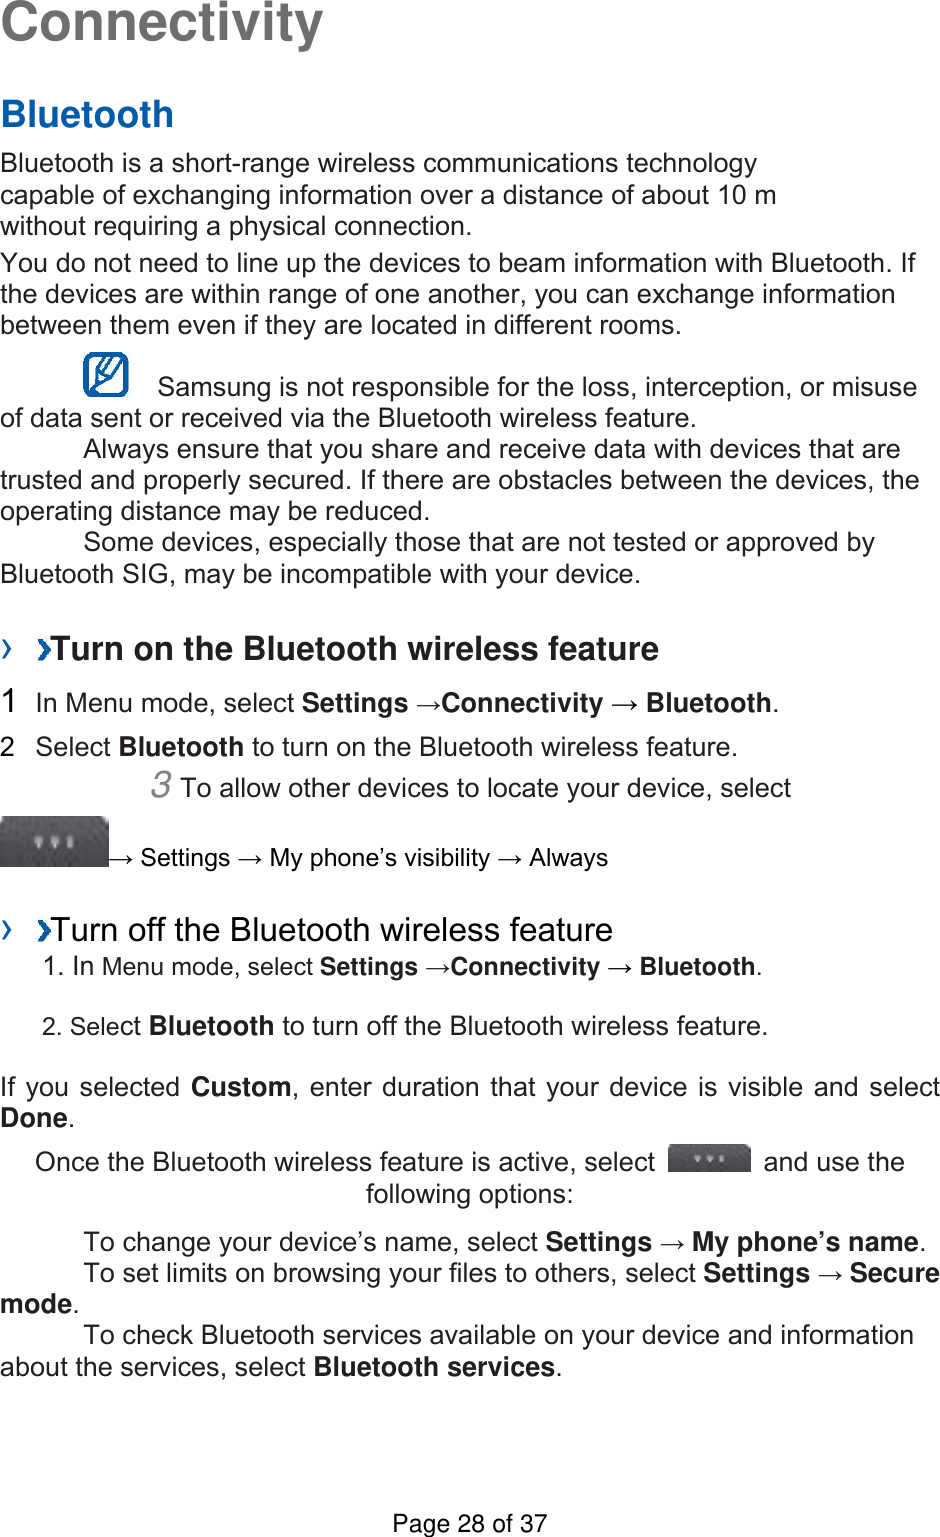 Connectivity   Bluetooth   Bluetooth is a short-range wireless communications technology capable of exchanging information over a distance of about 10 m without requiring a physical connection.   You do not need to line up the devices to beam information with Bluetooth. If the devices are within range of one another, you can exchange information between them even if they are located in different rooms.      Samsung is not responsible for the loss, interception, or misuse of data sent or received via the Bluetooth wireless feature.     Always ensure that you share and receive data with devices that are trusted and properly secured. If there are obstacles between the devices, the operating distance may be reduced.     Some devices, especially those that are not tested or approved by Bluetooth SIG, may be incompatible with your device.    ›  Turn on the Bluetooth wireless feature   1  In Menu mode, select Settings →Connectivity → Bluetooth.  2  Select Bluetooth to turn on the Bluetooth wireless feature.   3 To allow other devices to locate your device, select   → Settings → My phone’s visibility → Always    ›  Turn off the Bluetooth wireless feature   1. In Menu mode, select Settings →Connectivity → Bluetooth. 2. Select Bluetooth to turn off the Bluetooth wireless feature. If you selected Custom, enter duration that your device is visible and select Done.  Once the Bluetooth wireless feature is active, select    and use the following options:     To change your device’s name, select Settings → My phone’s name.    To set limits on browsing your files to others, select Settings → Secure mode.    To check Bluetooth services available on your device and information about the services, select Bluetooth services.   Page 28 of 37